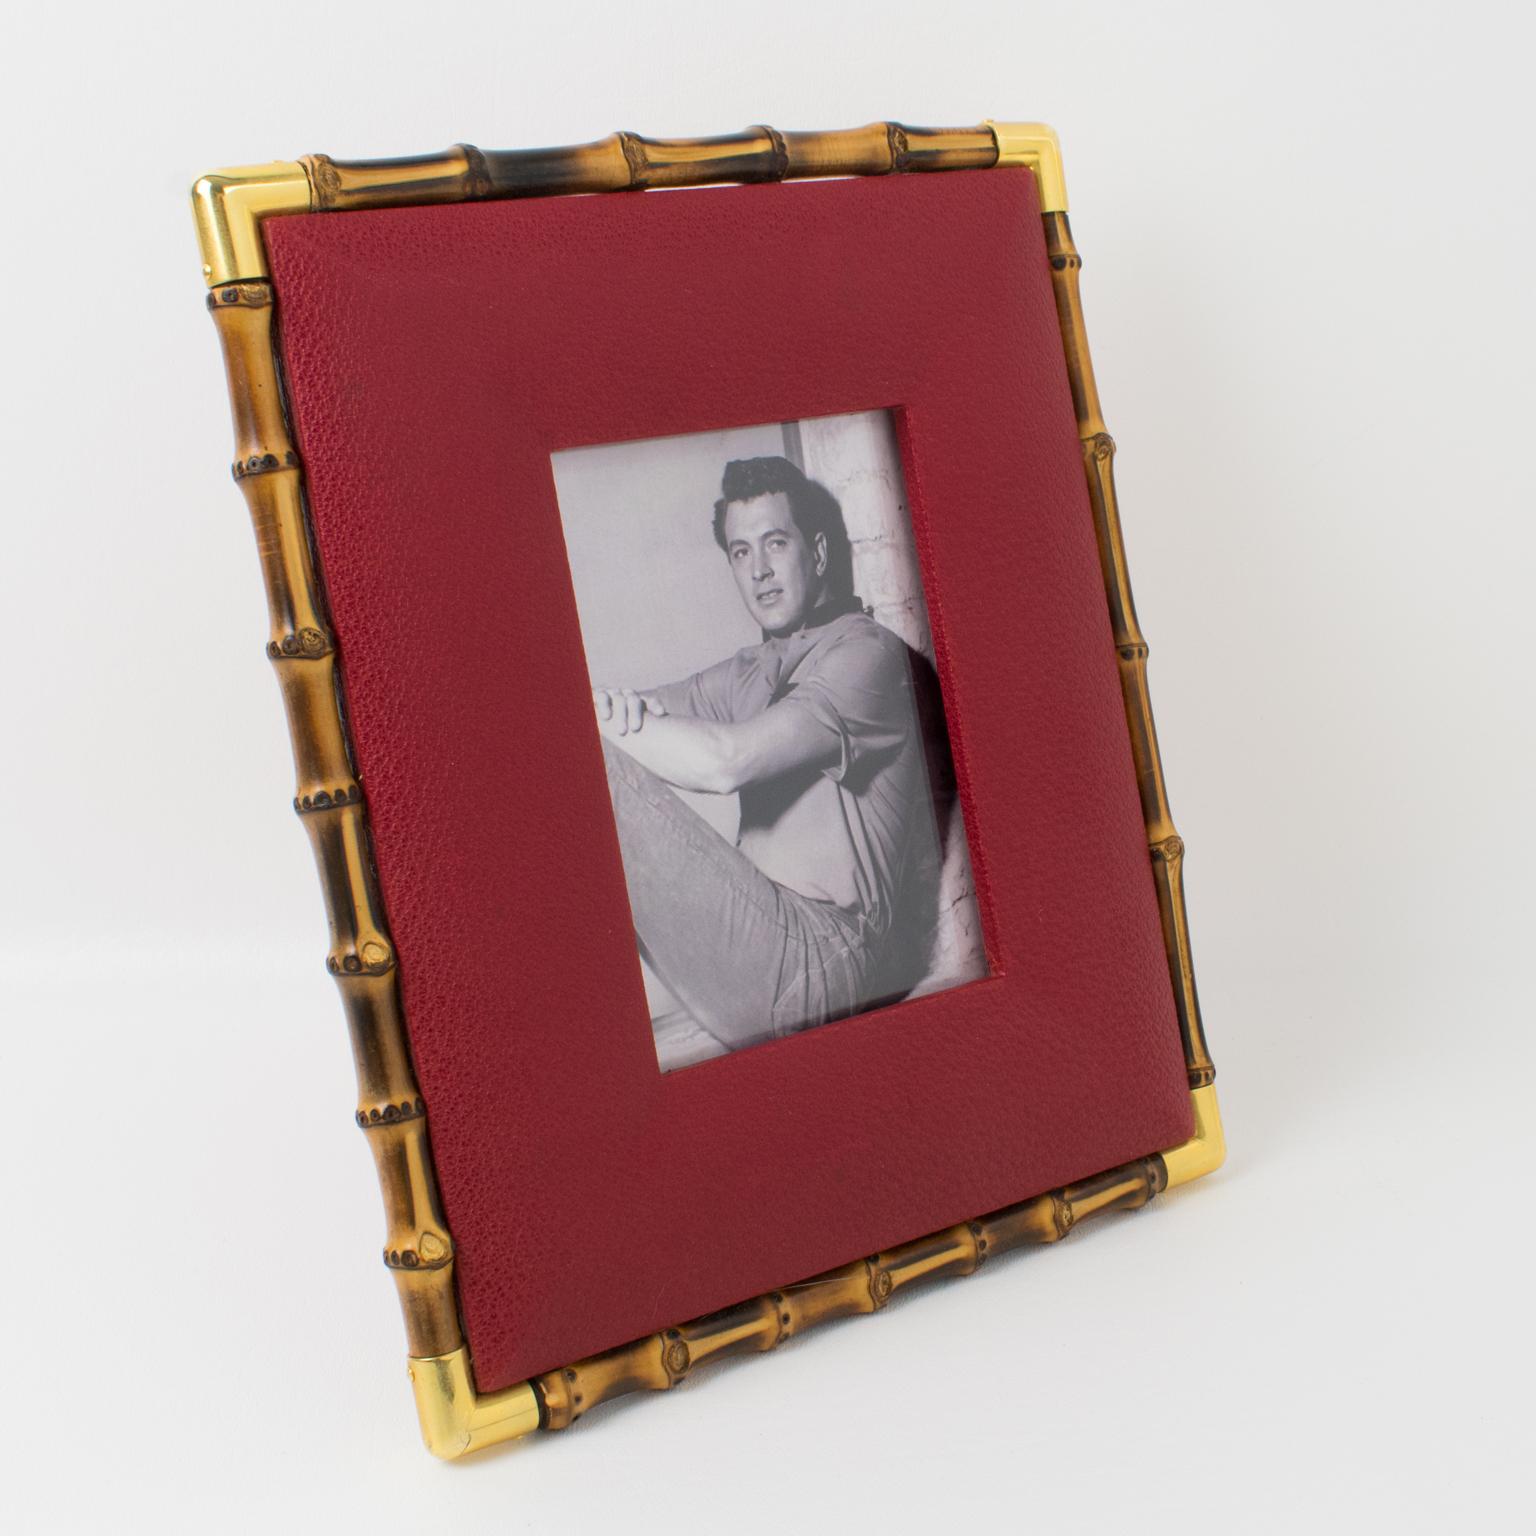 Superb picture photo frame by Italian designer Gucci. Timeless and elegant red calfskin leather with textured pattern ornate with real bamboo and polished brass accents. Back and easel in same red leather with gold leaf hot-stamped Gucci, Made in